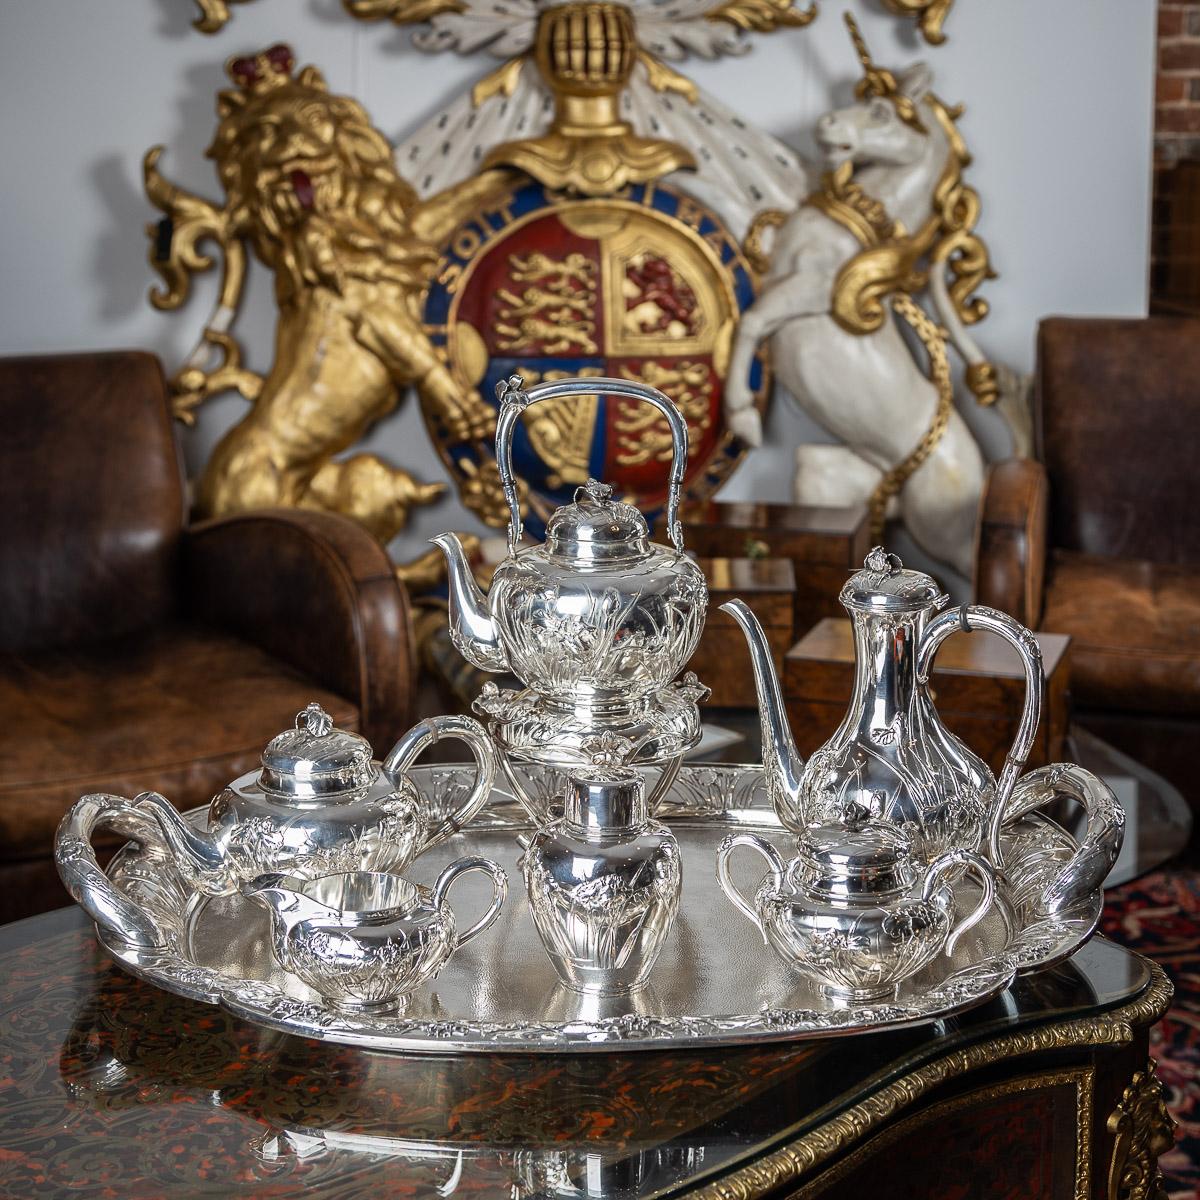 Antique stunning and exceptional early-20th Century Japanese solid silver siz piece tea and coffee service, comprising a coffee pot, teapot, kettle on stand, tea caddy, waist bowl, sugar bowl, cream jug and tray. This magnificent set boasts